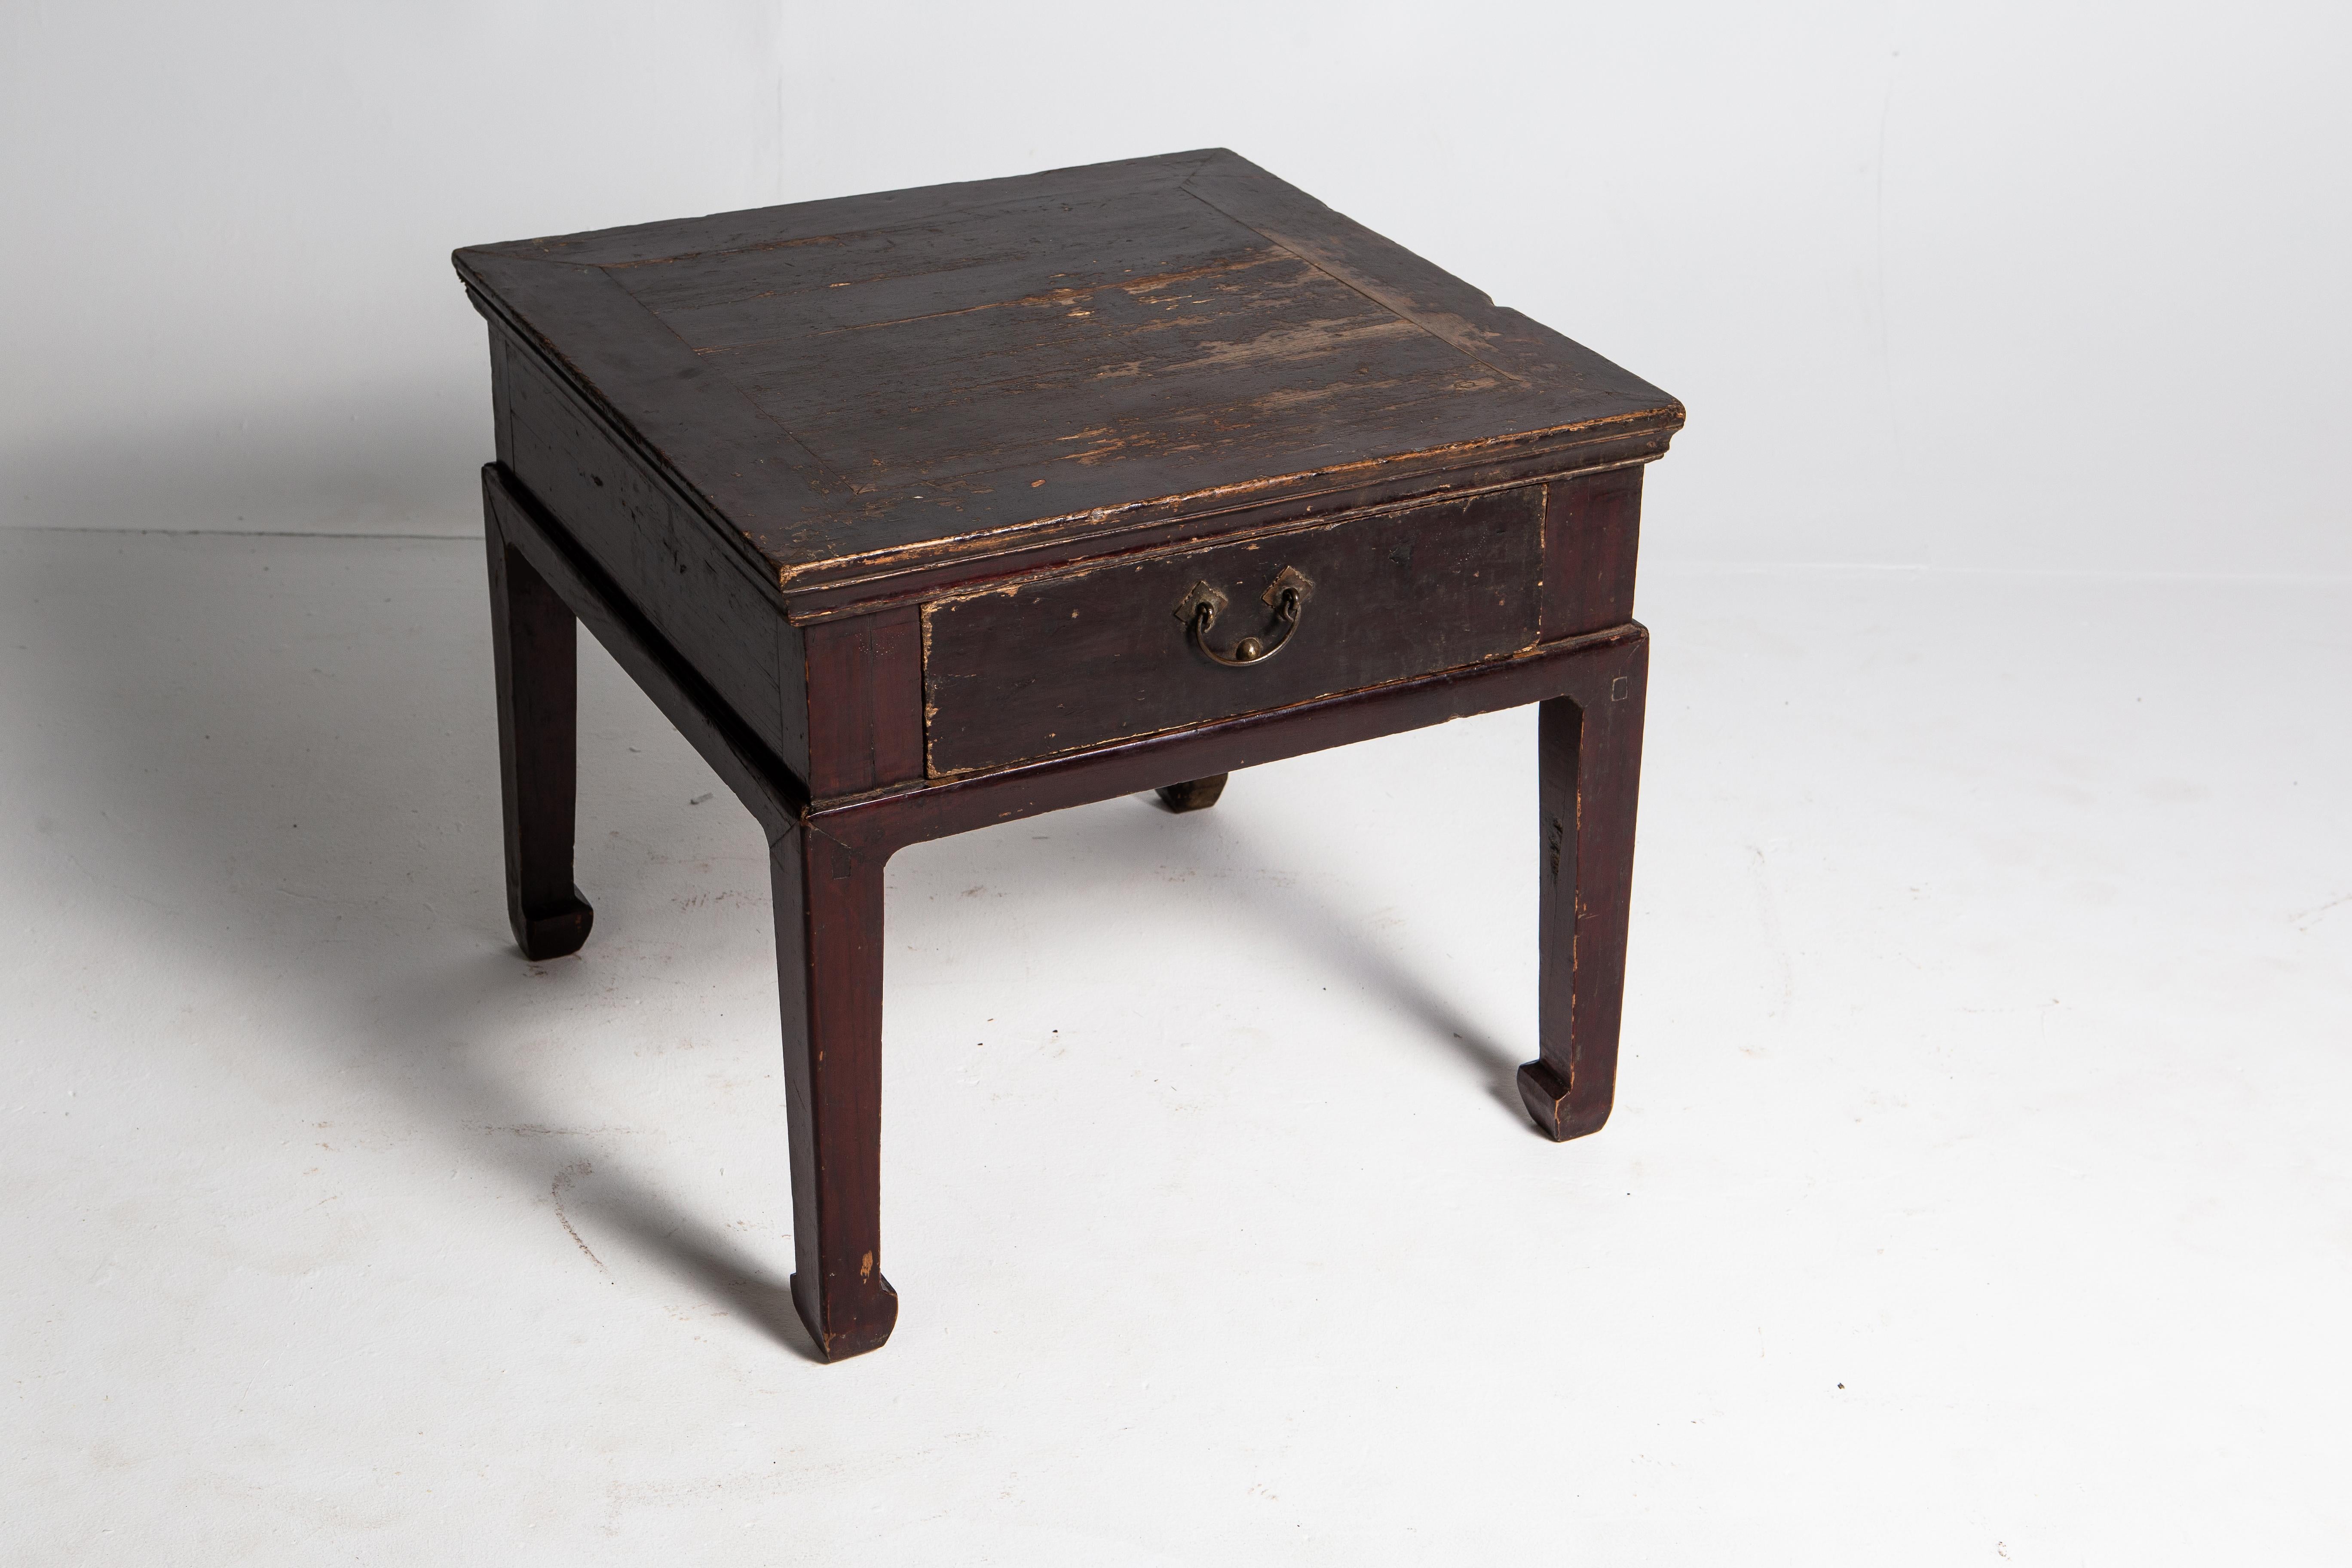 Late Qing Dynasty Small Square Table with Drawer 1